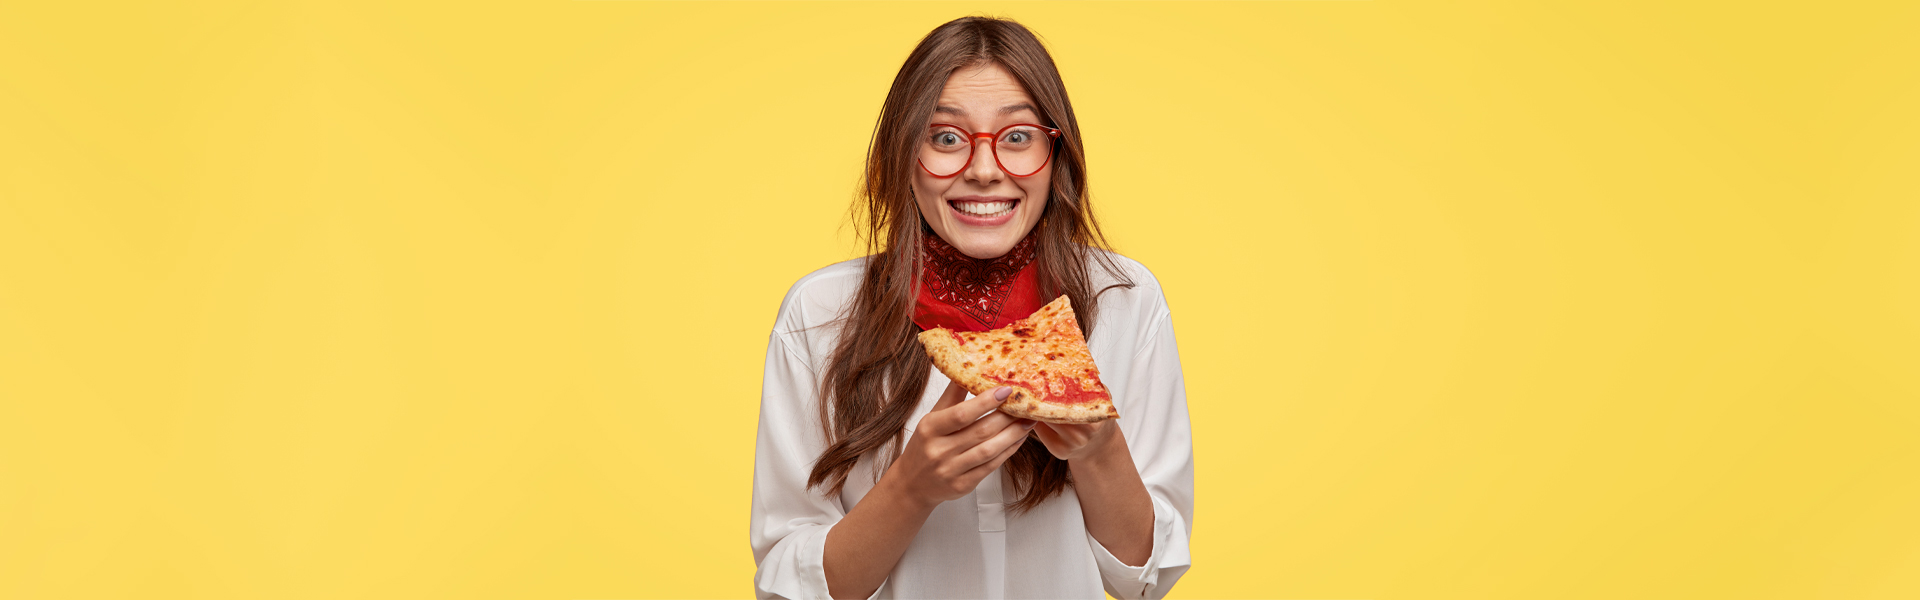 Can I Eat Pizza After Dental Implants Treatment?